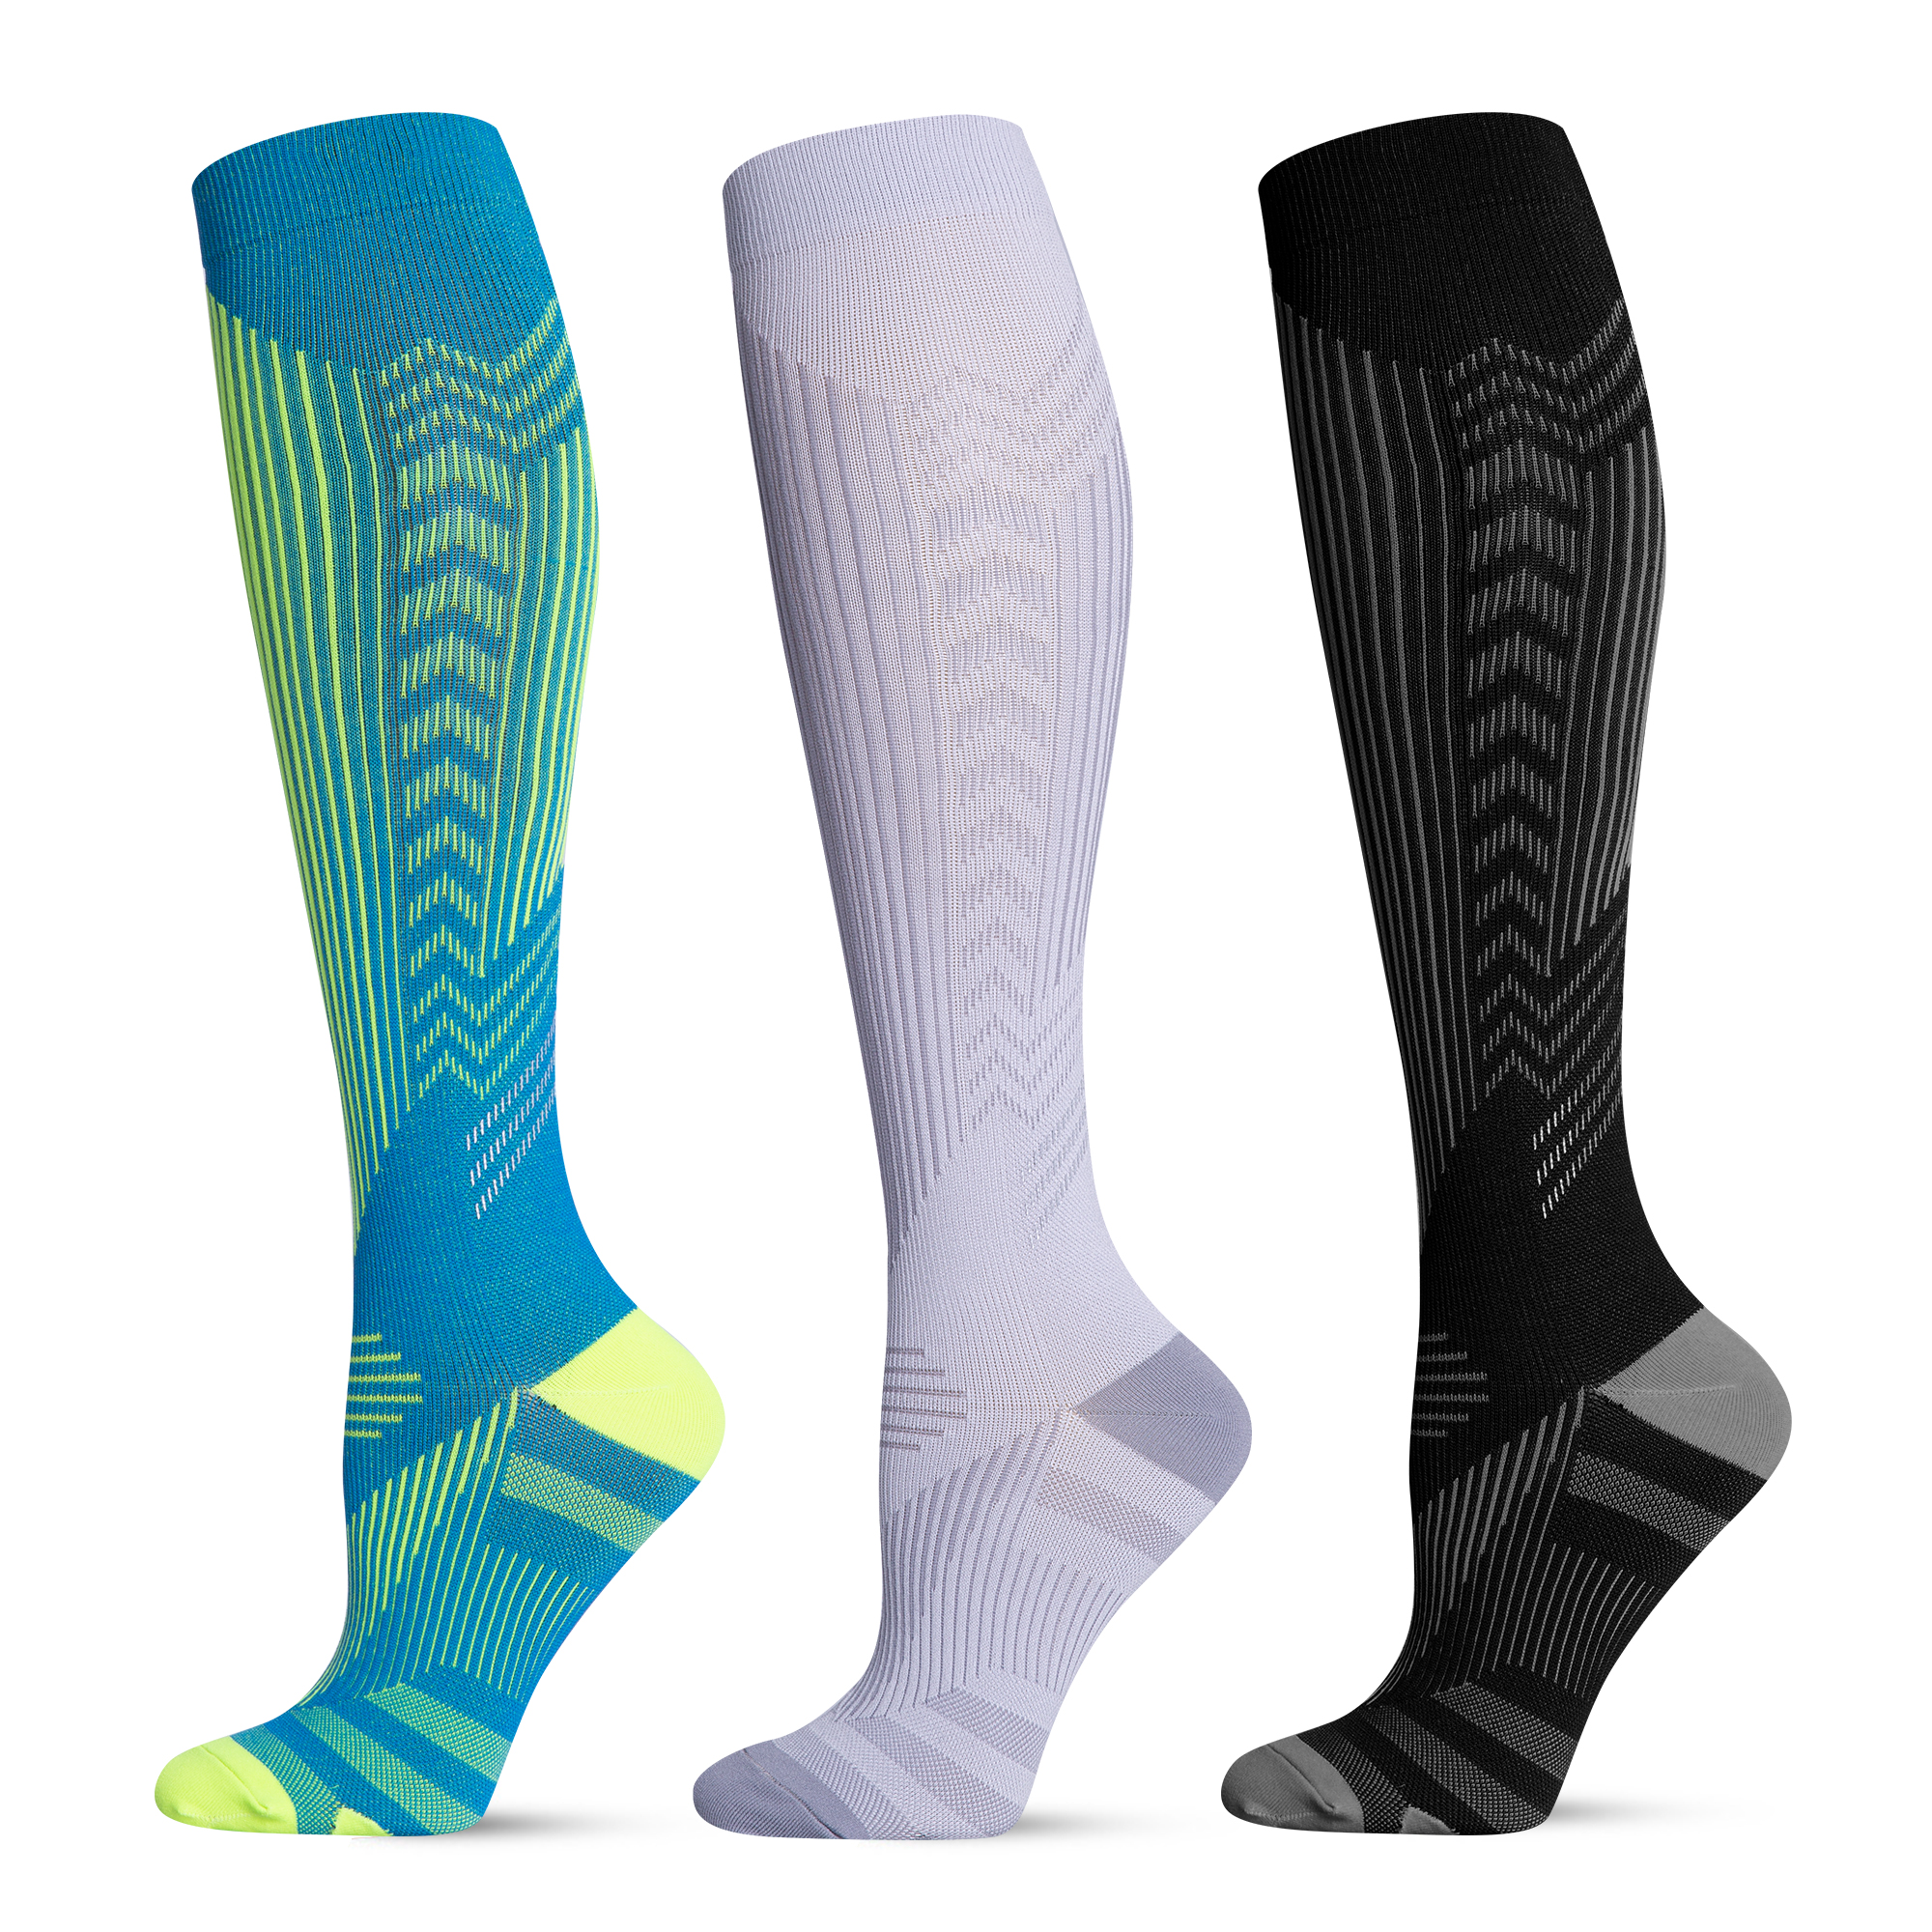 Best-Selling Softball Socks - Compression Socks 360-degree Stretch for Greater Flexibility and Durability Women & Men Circulation – Best for Medical, Running, Athletic Pressure Socks ...